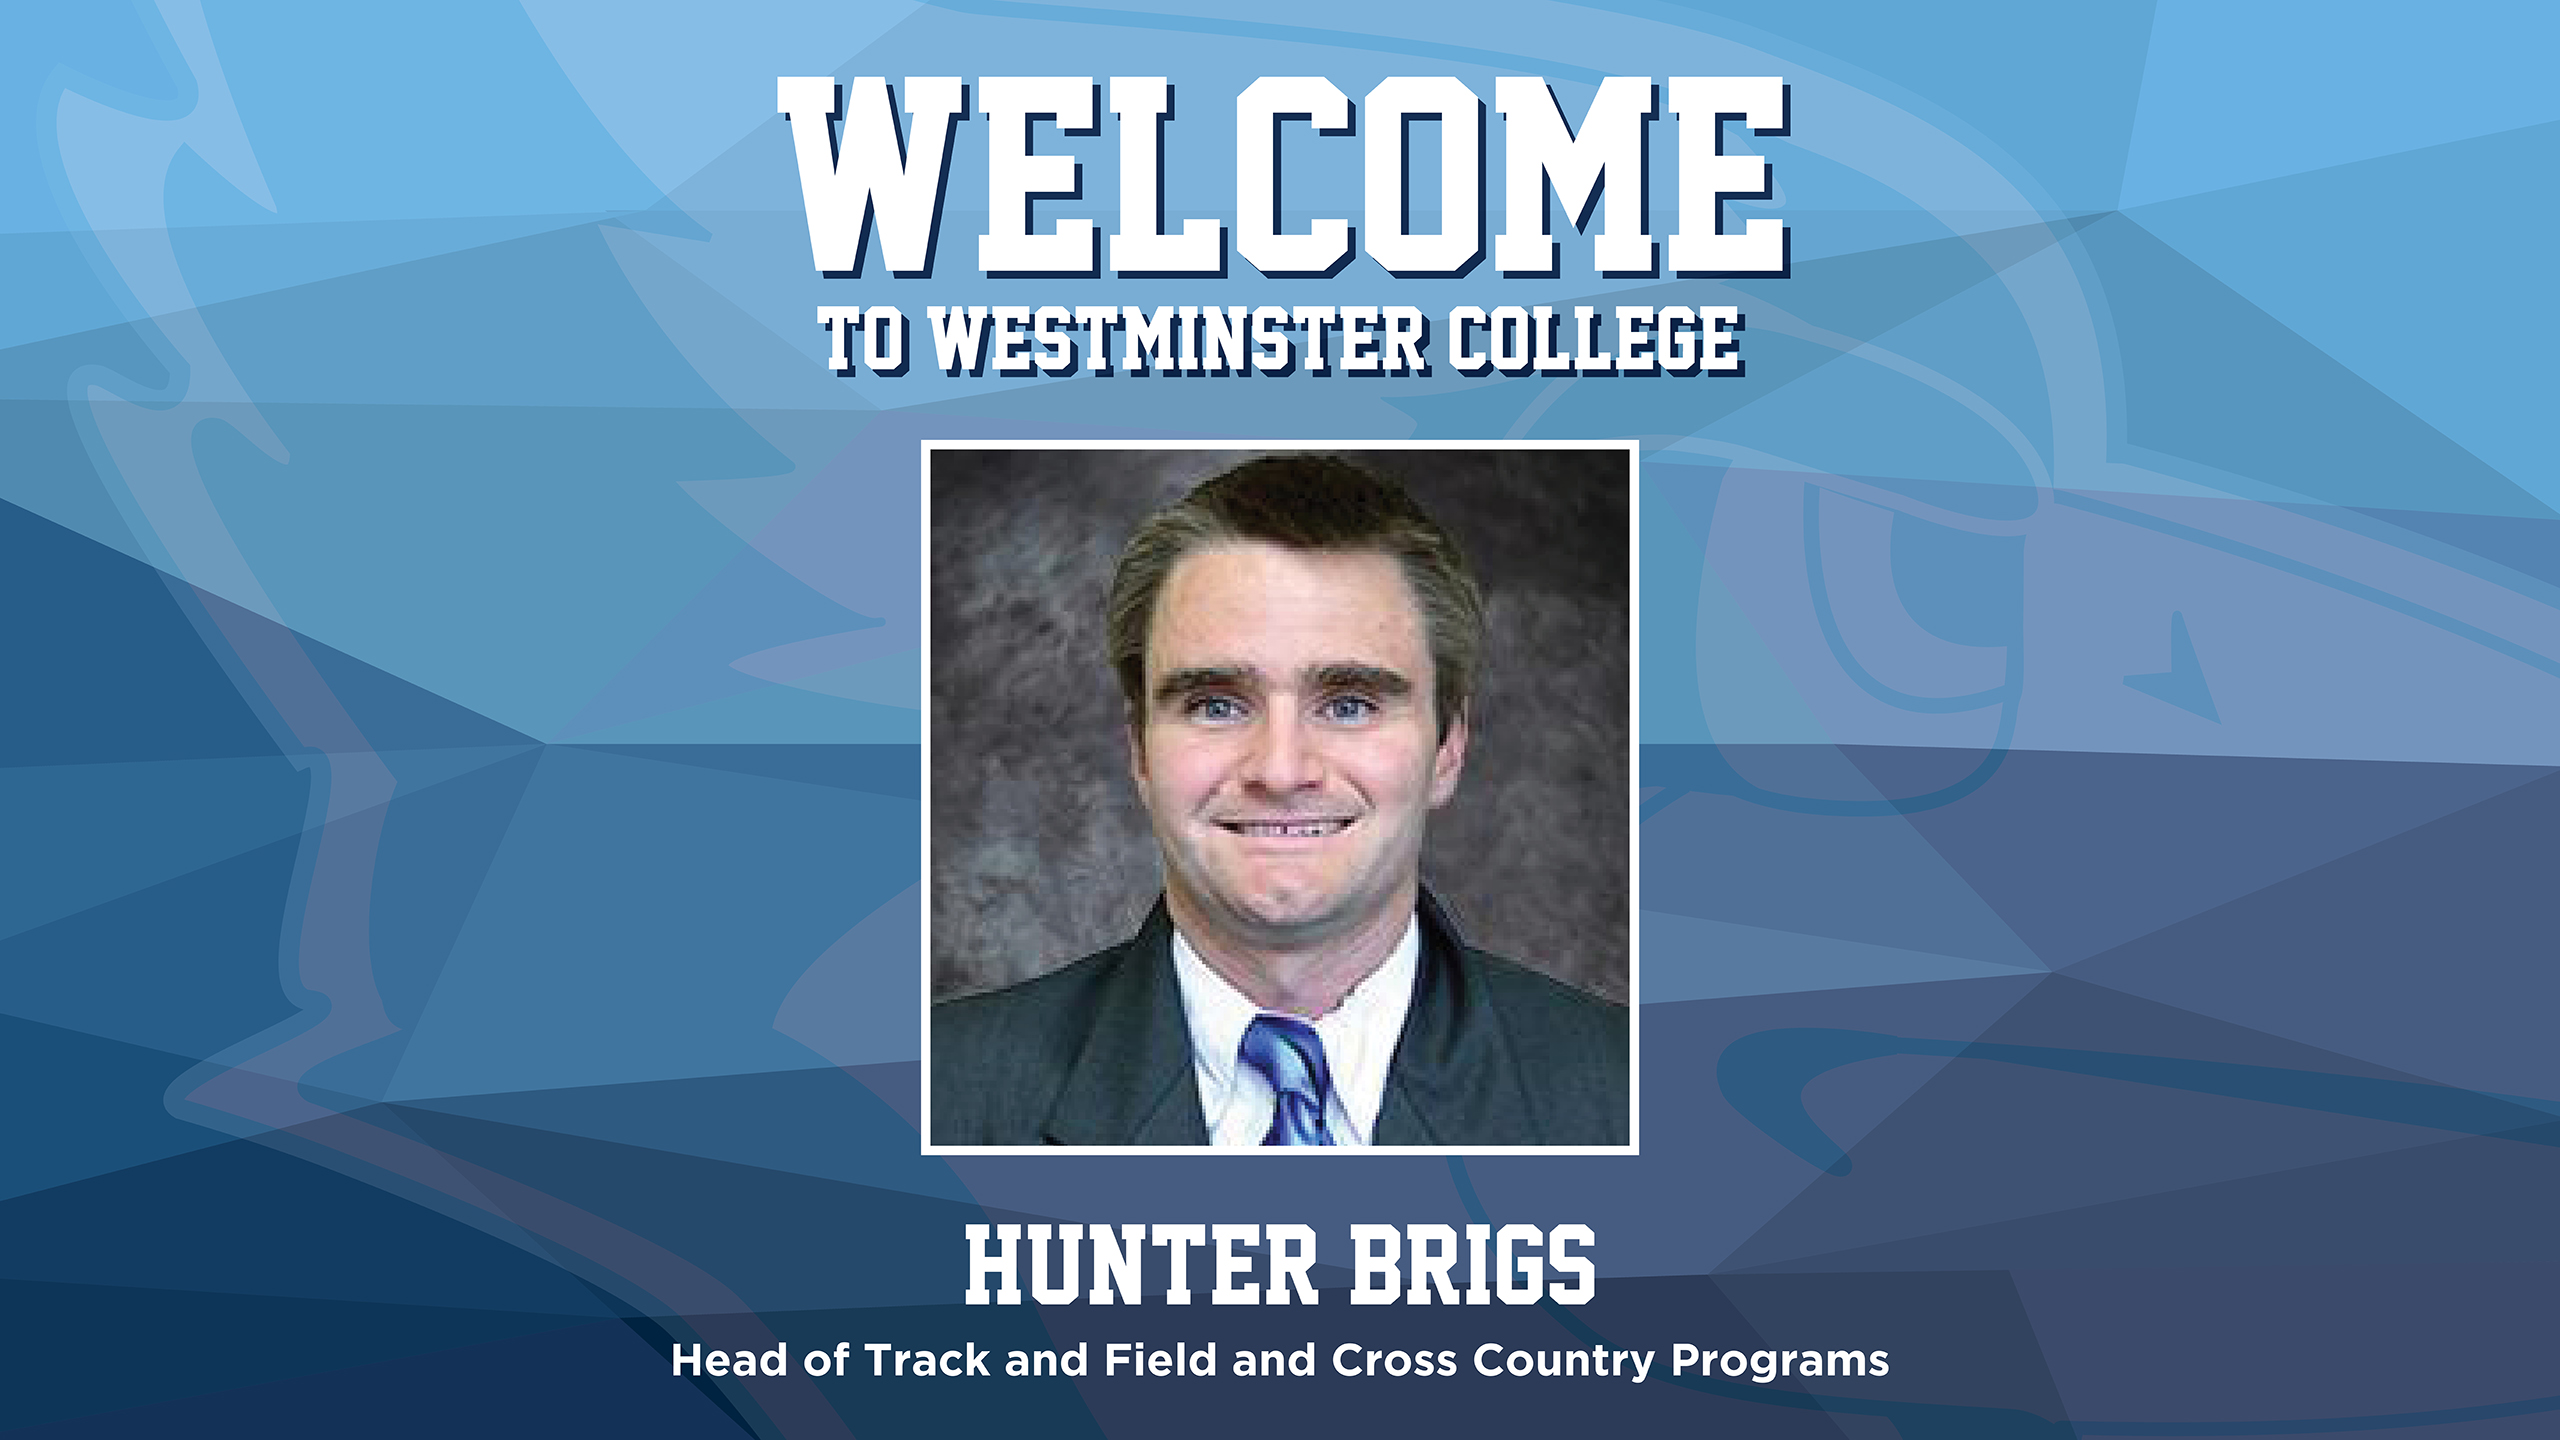 Hunter Briggs Named The Head of Track and Field and Cross-Country Programs